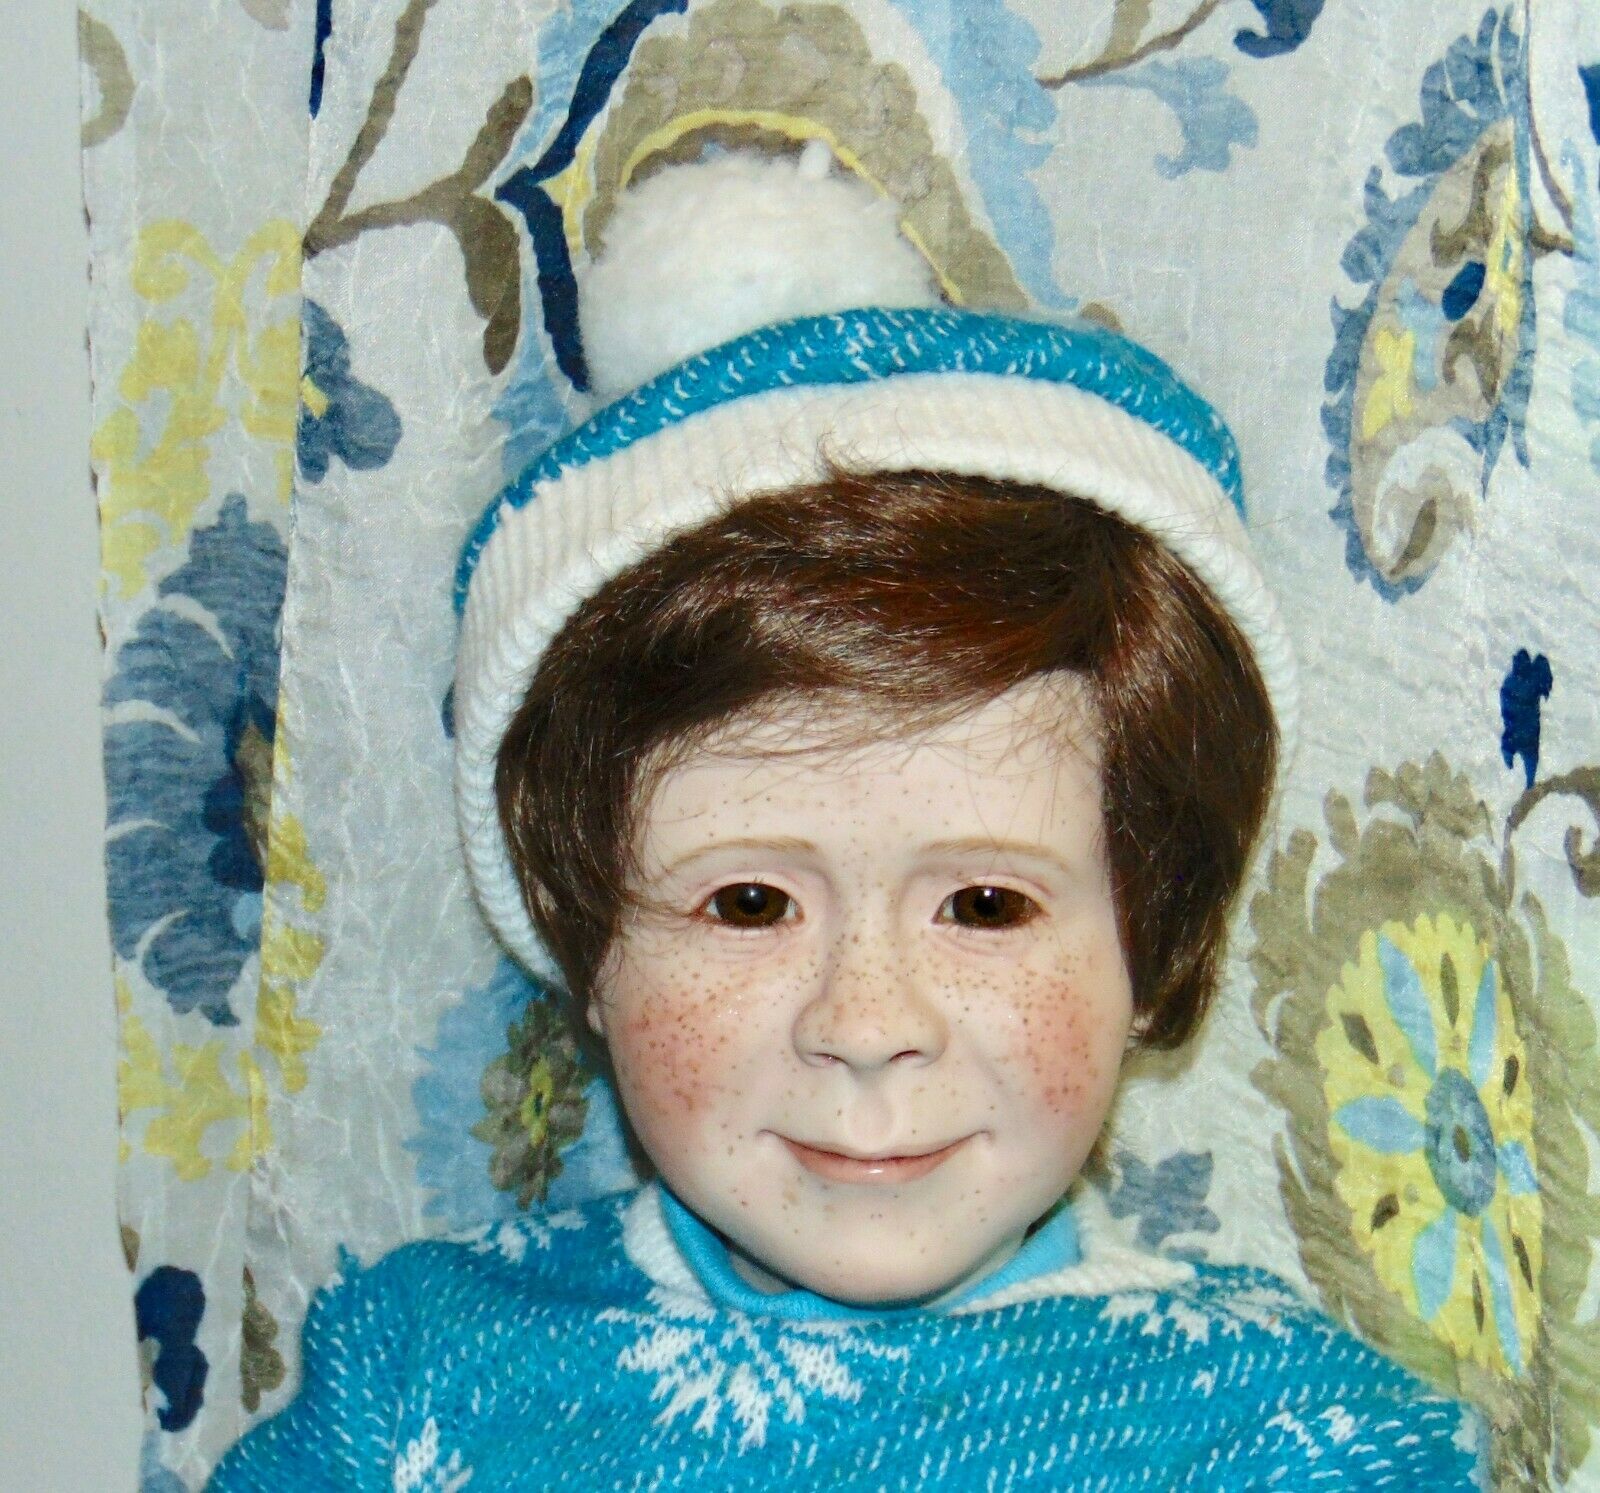 Rare! Marci Cohen Porcelain Doll Andy 1/25 Extremely Limited! Freckle Faced Boy